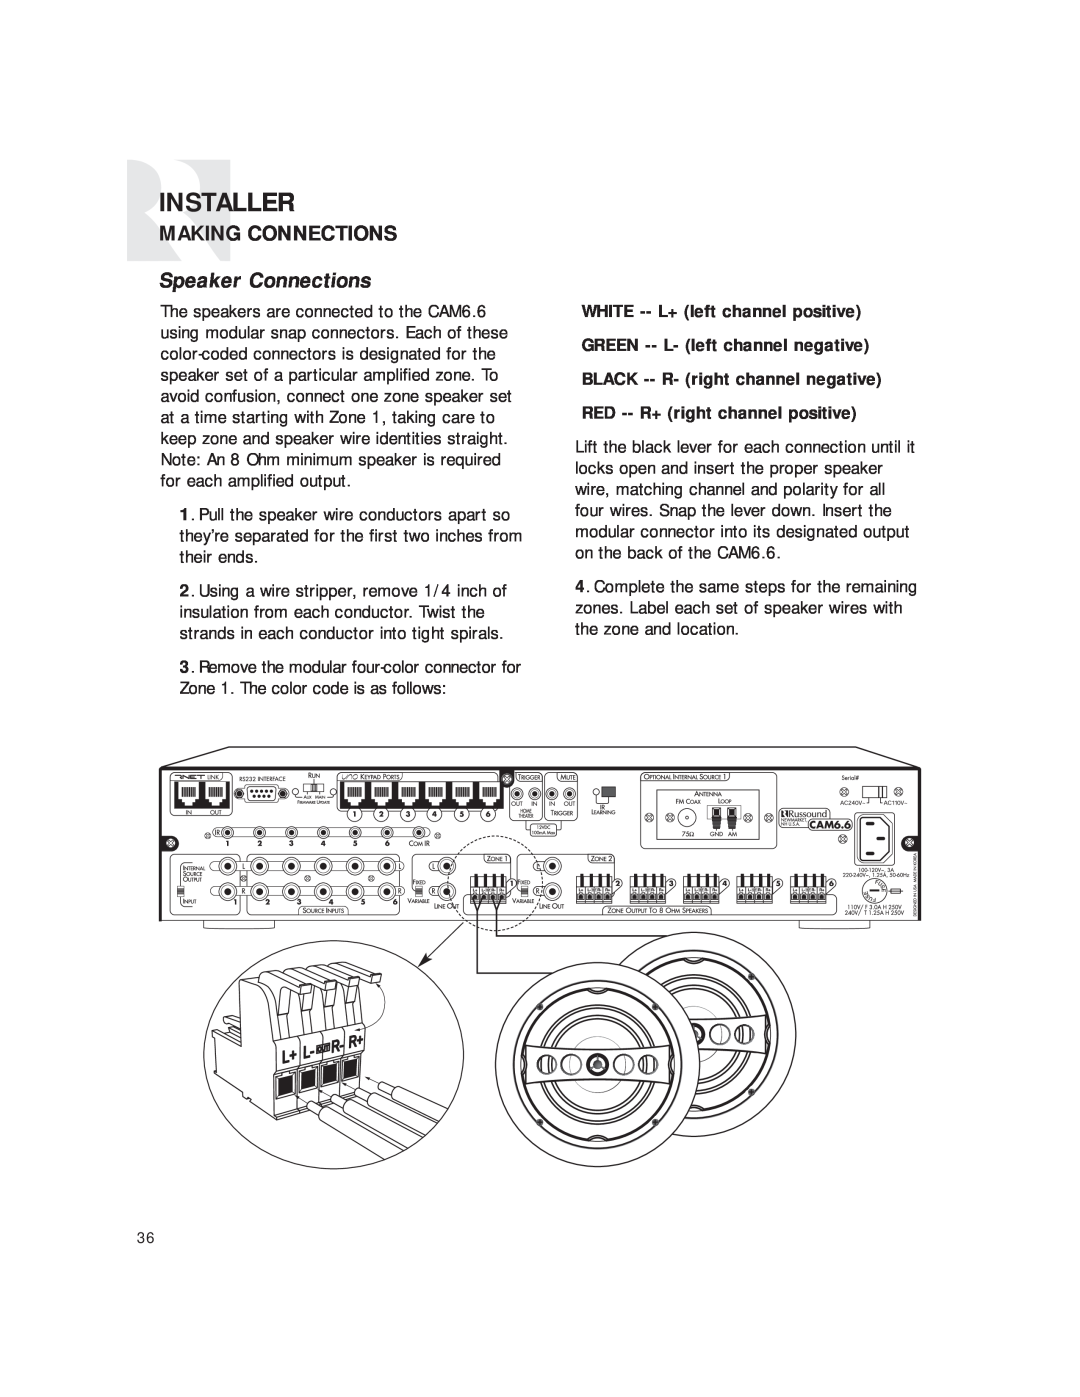 Russound CAM6.6T instruction manual Speaker Connections, Installer, Making Connections 